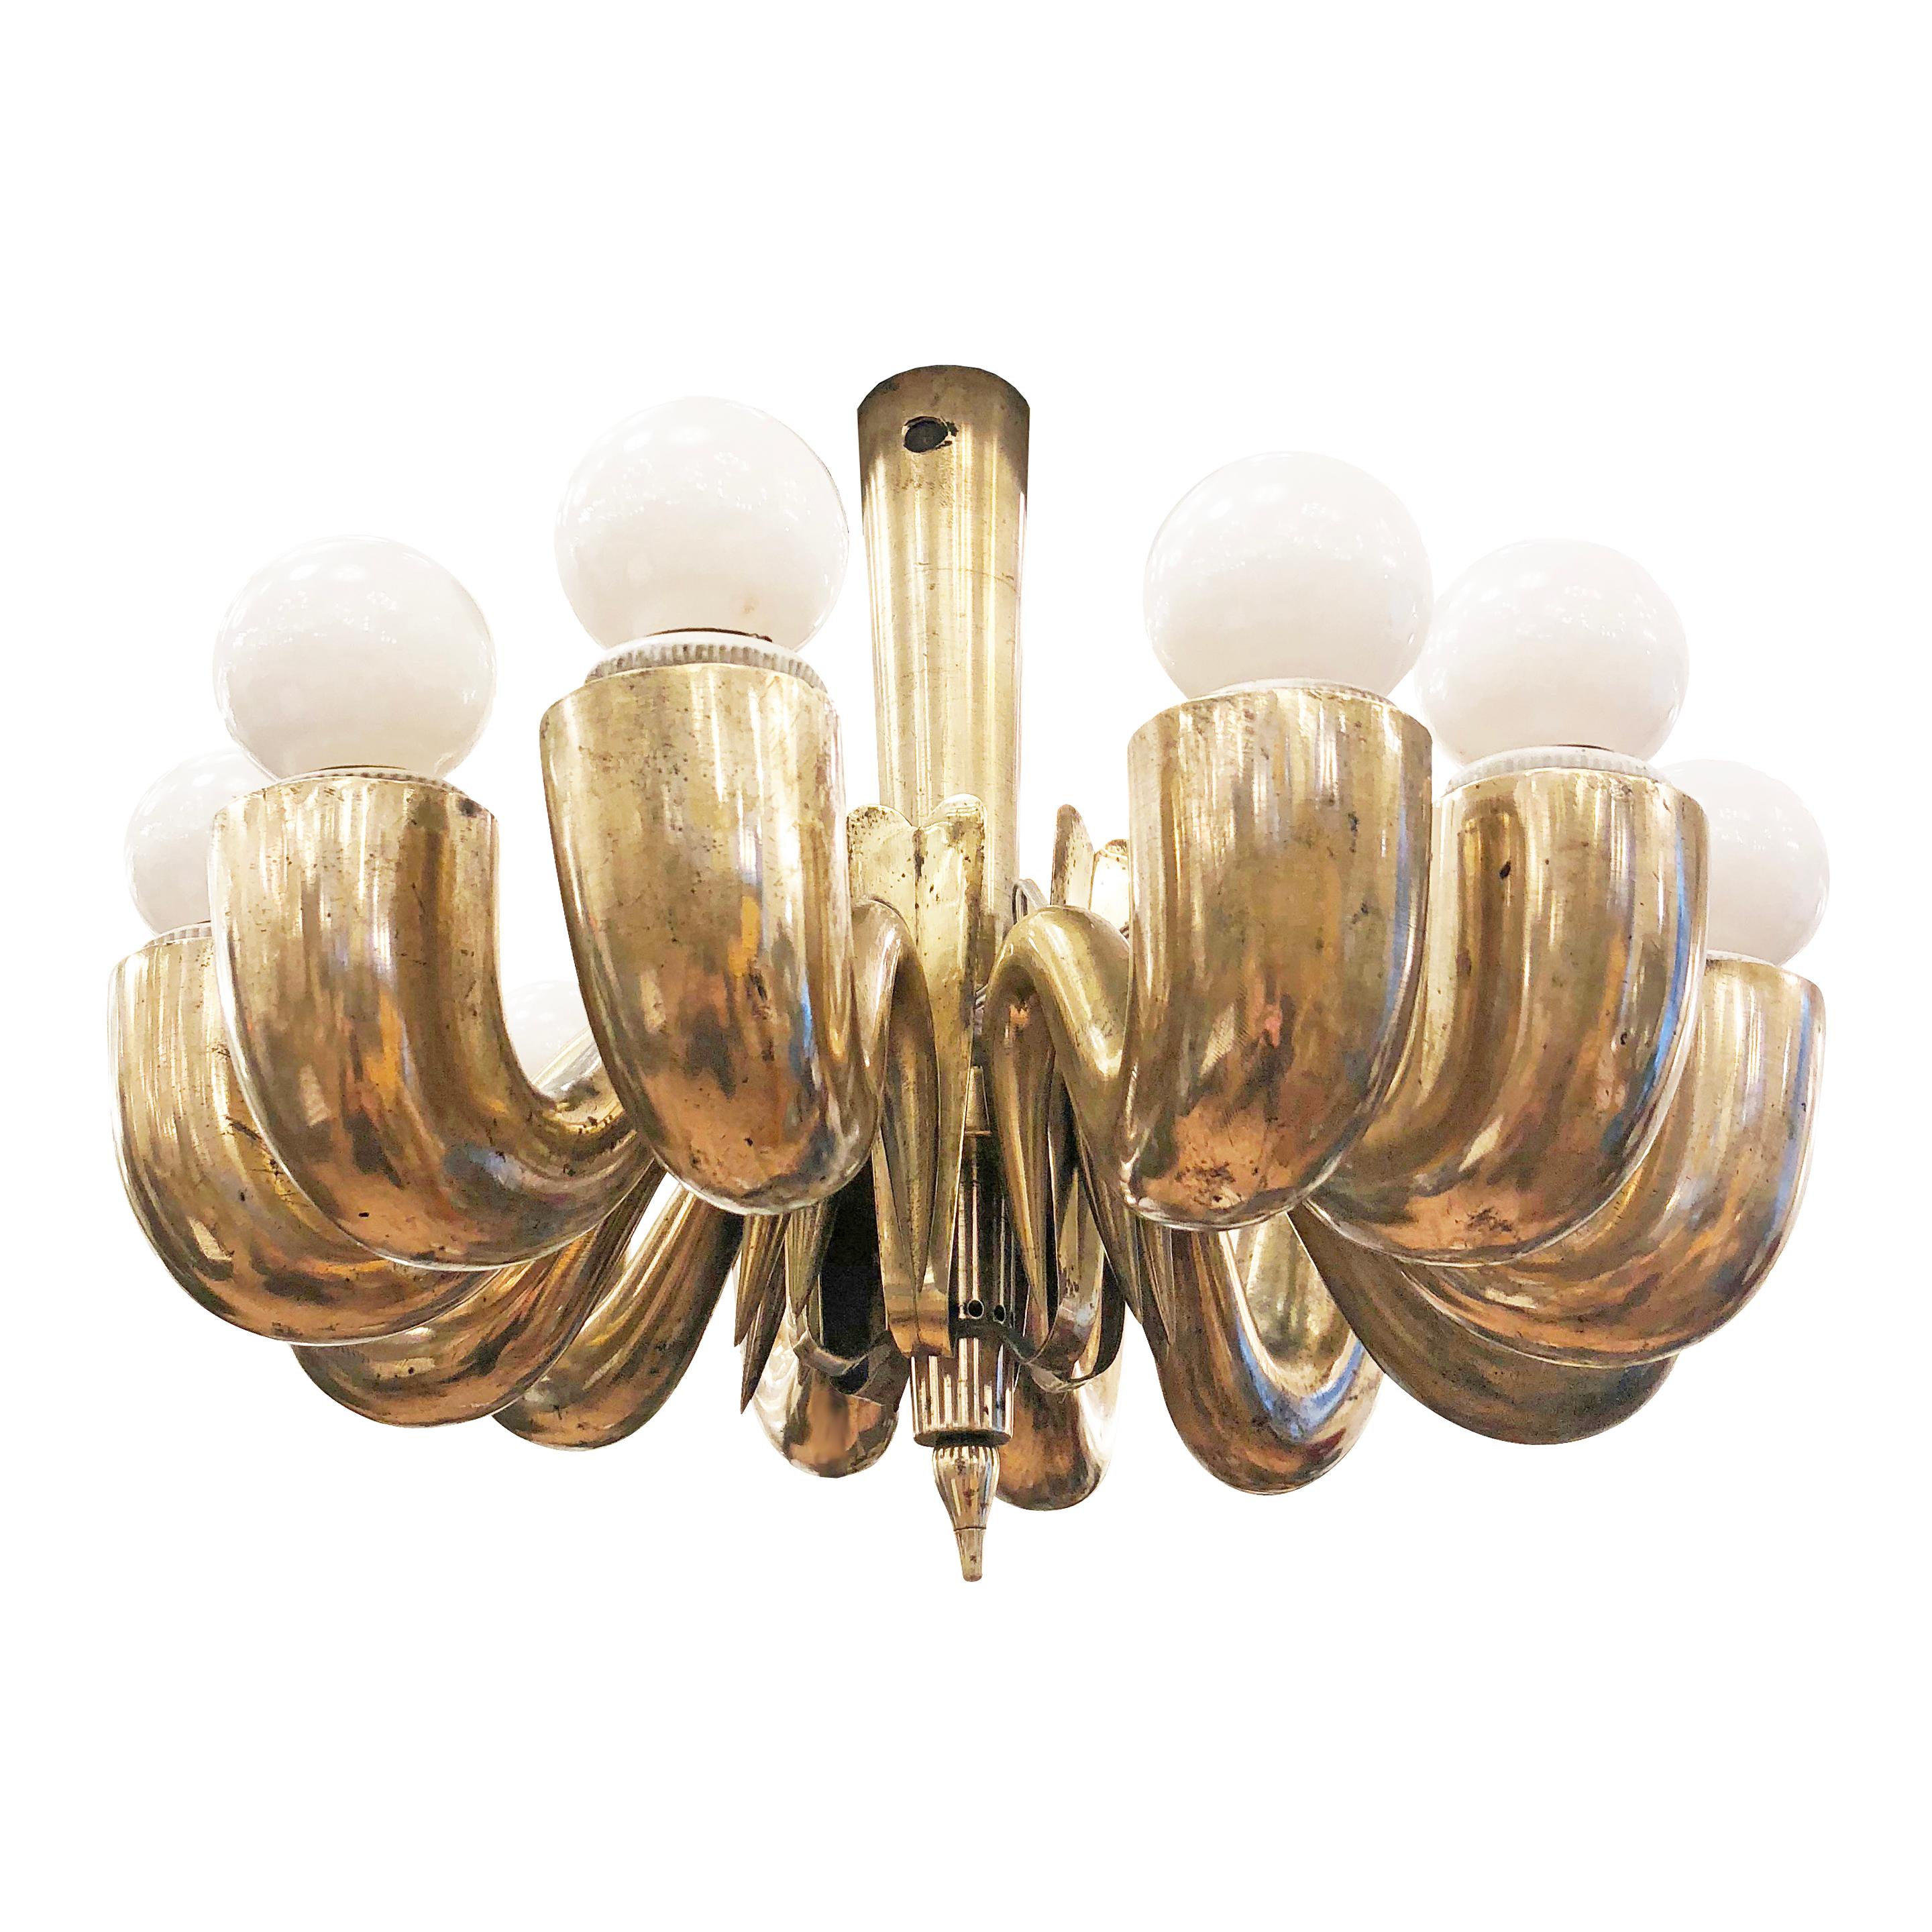 Diminutive midcentury chandelier attributed to Gugliemo Ulrich composed of 12 sloping cast brass arms each holding one E26 socket. To be hung on a chain.

Condition: Good vintage condition, minor wear and marks throughout.

Measure: Diameter